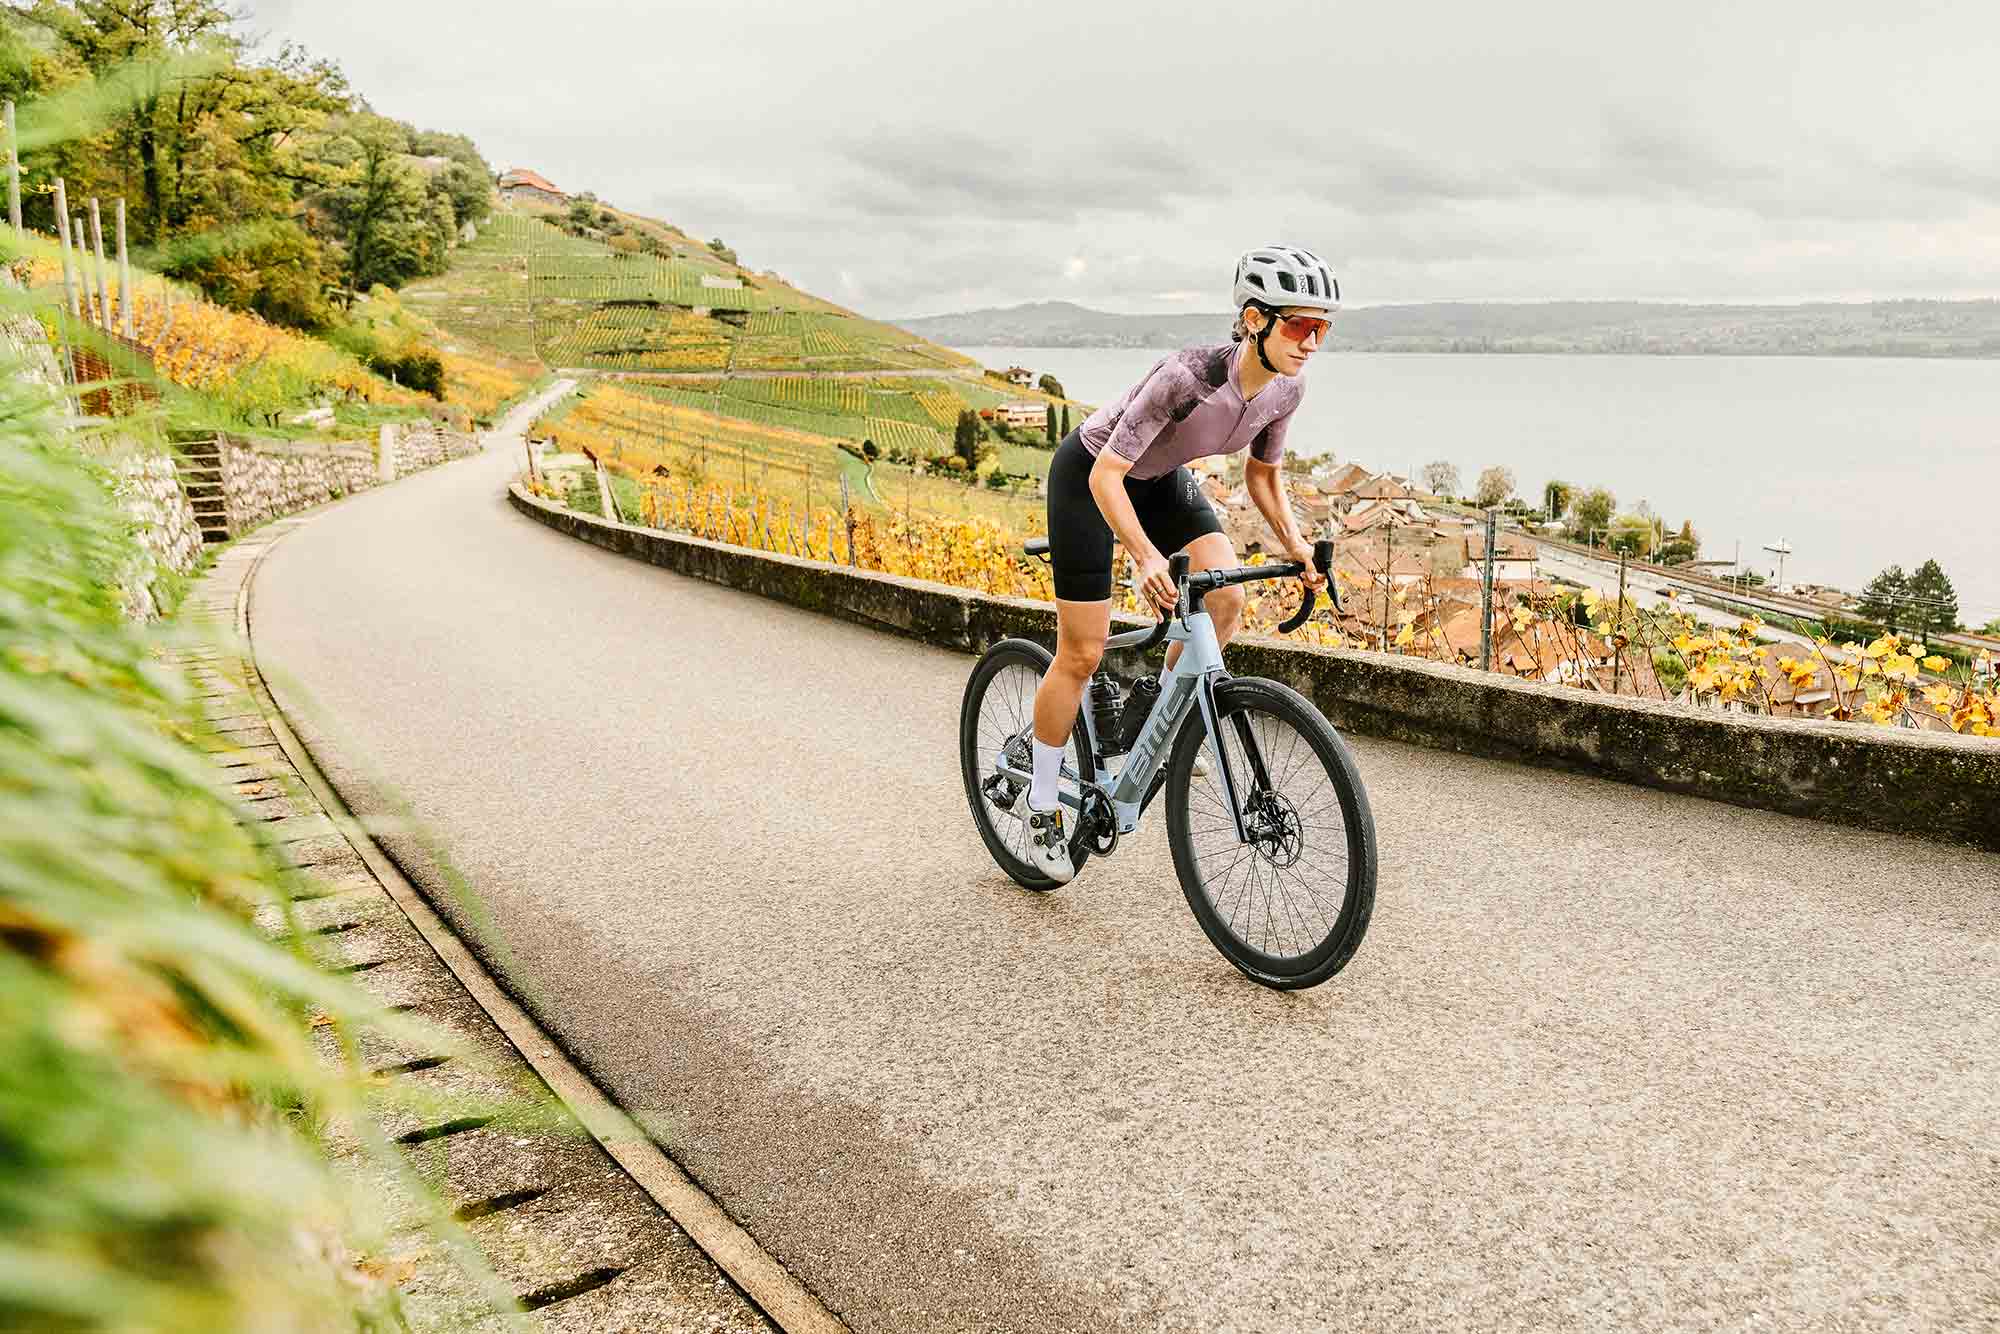 BMC says the new endurance road ebike is “built to extend the riding experience.”